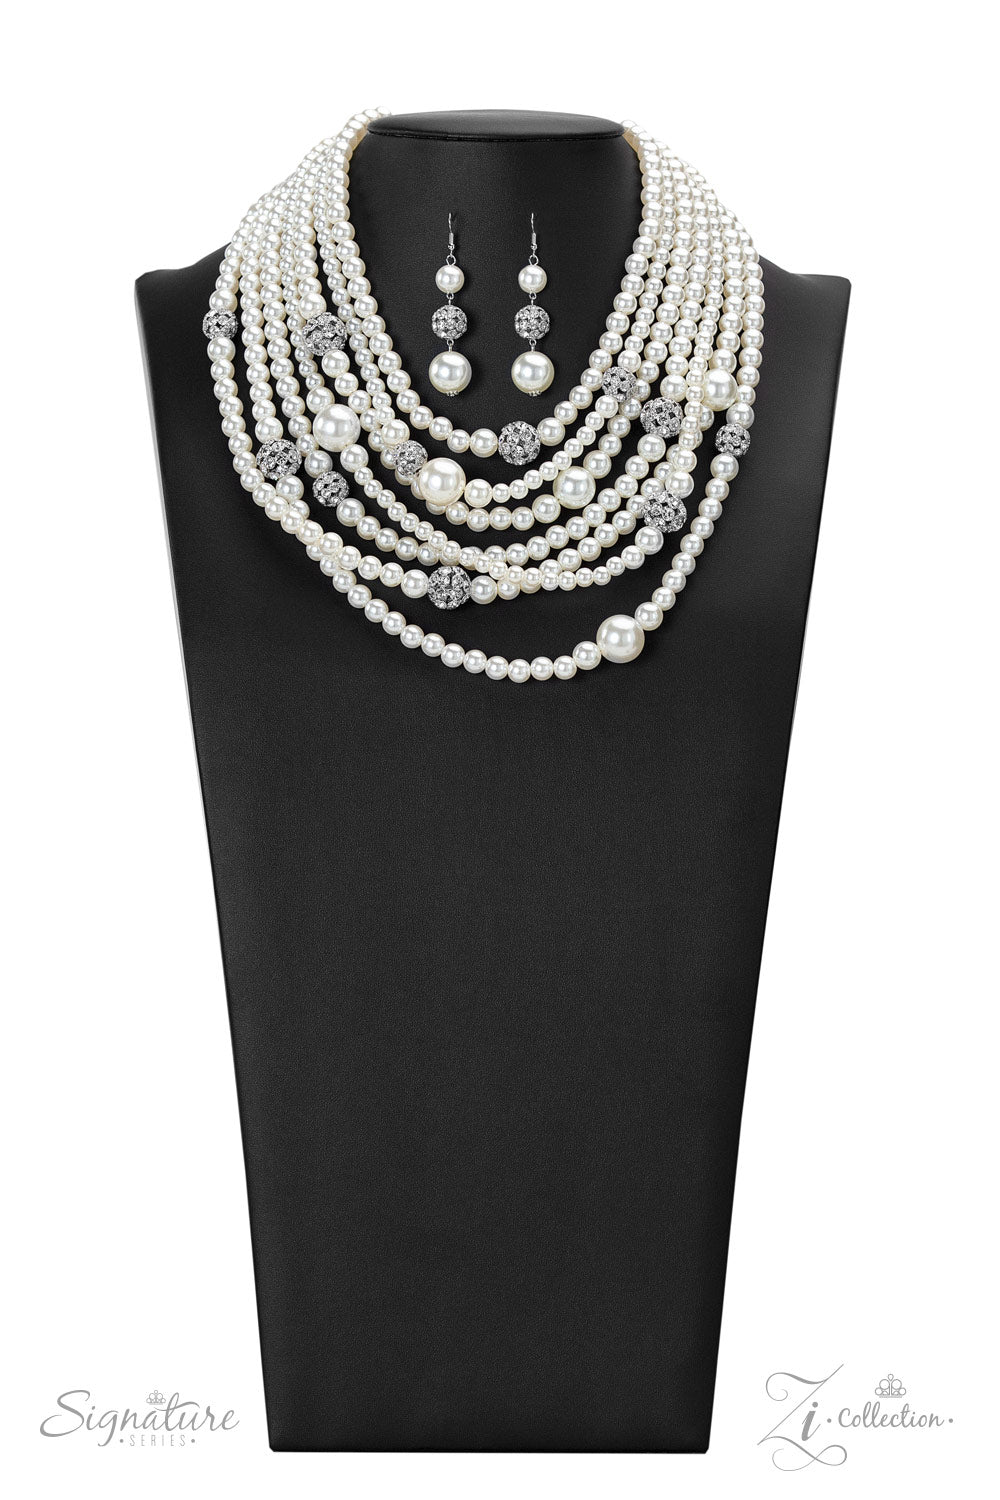 Strand after strand of lustrous white pearls layer down the chest, creating timeless tiers. Airy silver spheres, adorned in sparkling white rhinestones